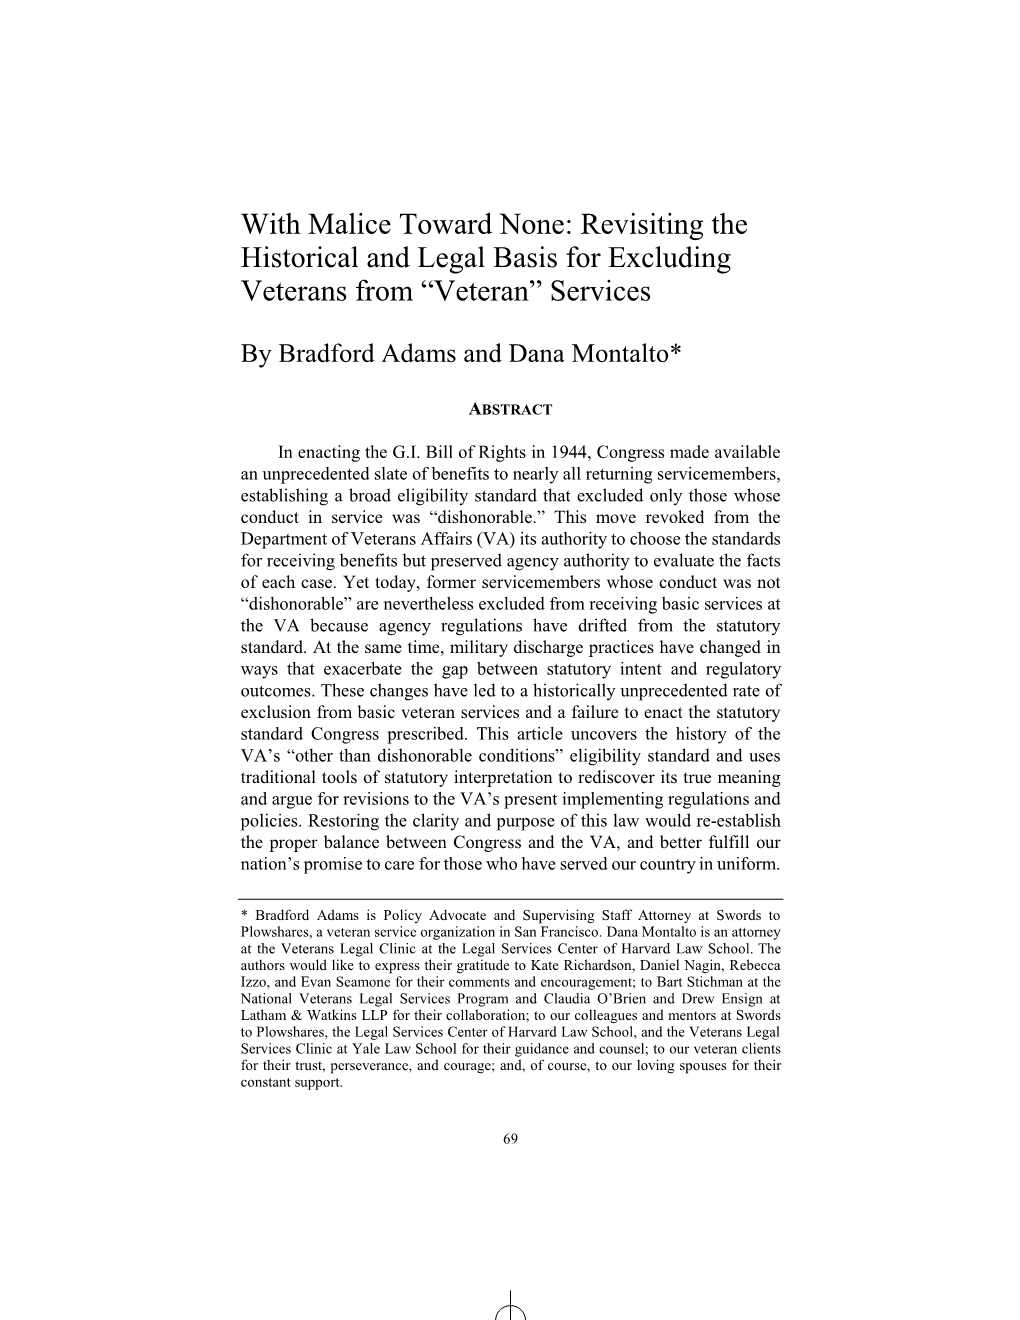 With Malice Toward None: Revisiting the Historical and Legal Basis for Excluding 9HWHUDQVIURP³9HWHUDQ´6HUYLFHV